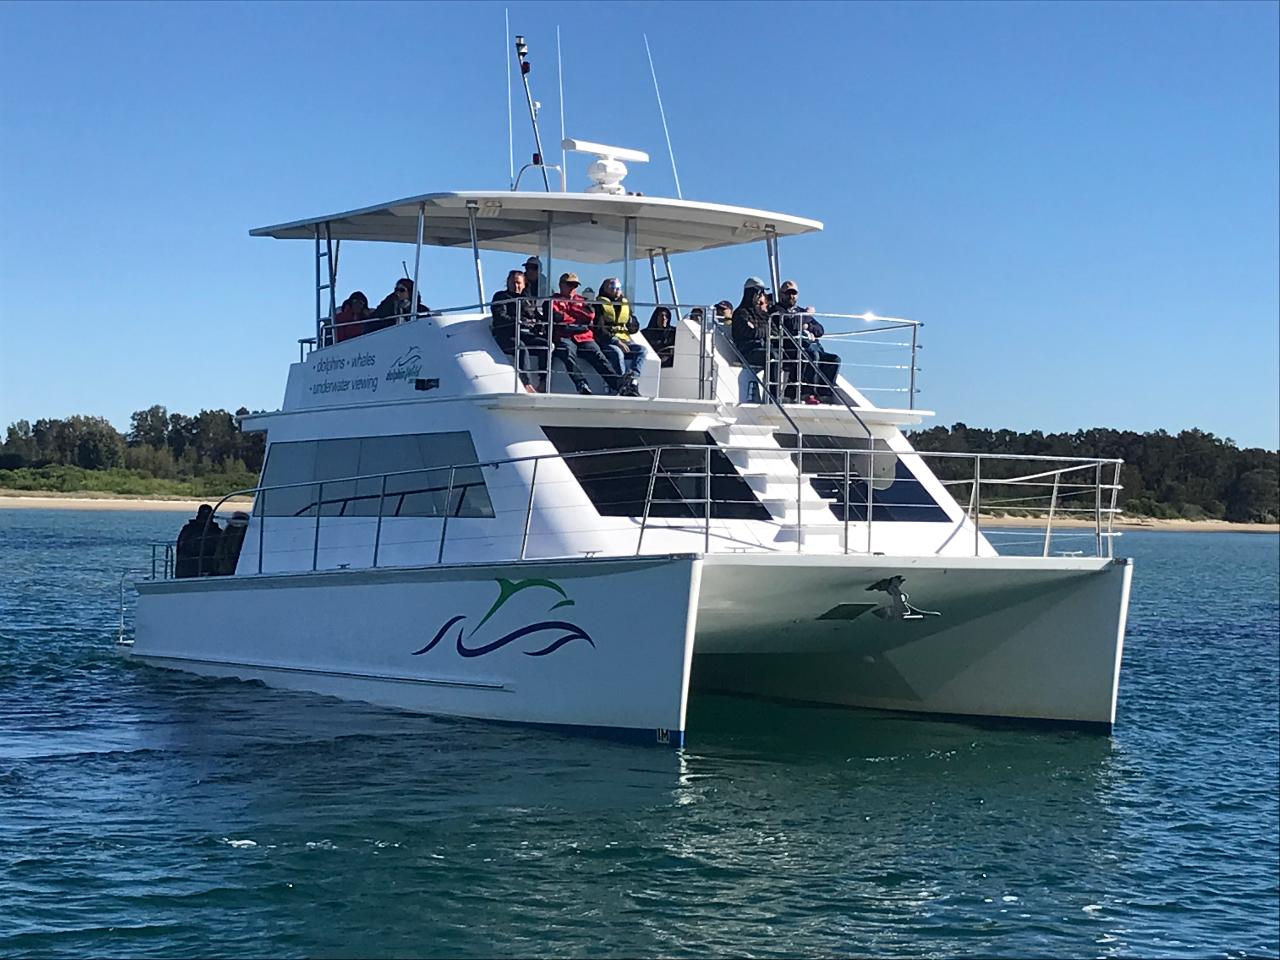 Devonshire Morning Tea River Cruise with Dolphin Spotting